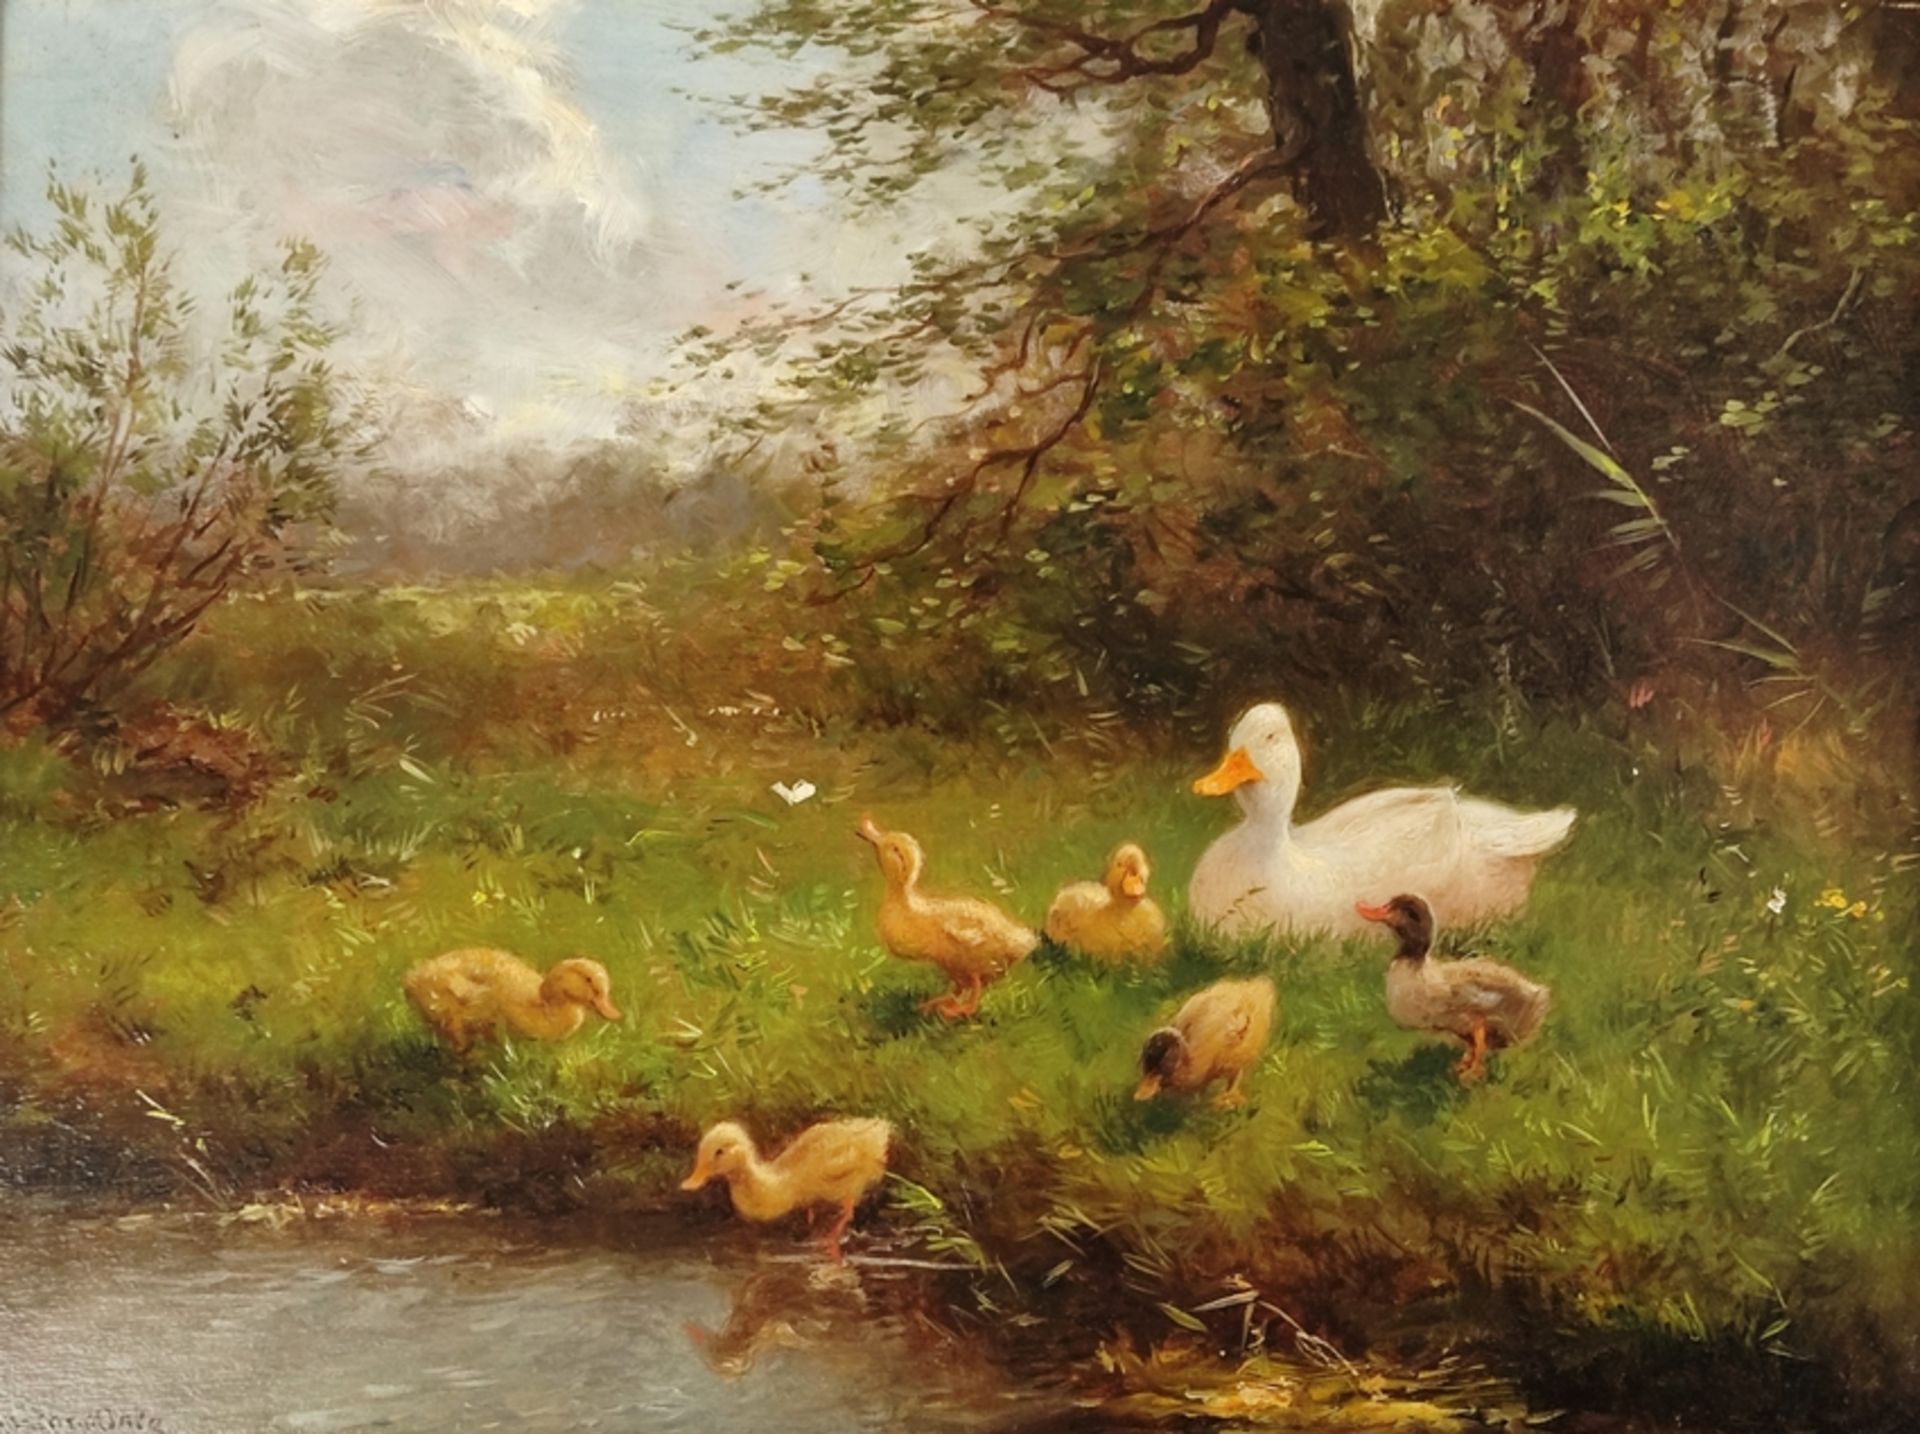 Artz, Constant (1870 Paris -1951 Soest) "Duck Family on the Riverbank", proud mother duck with her 